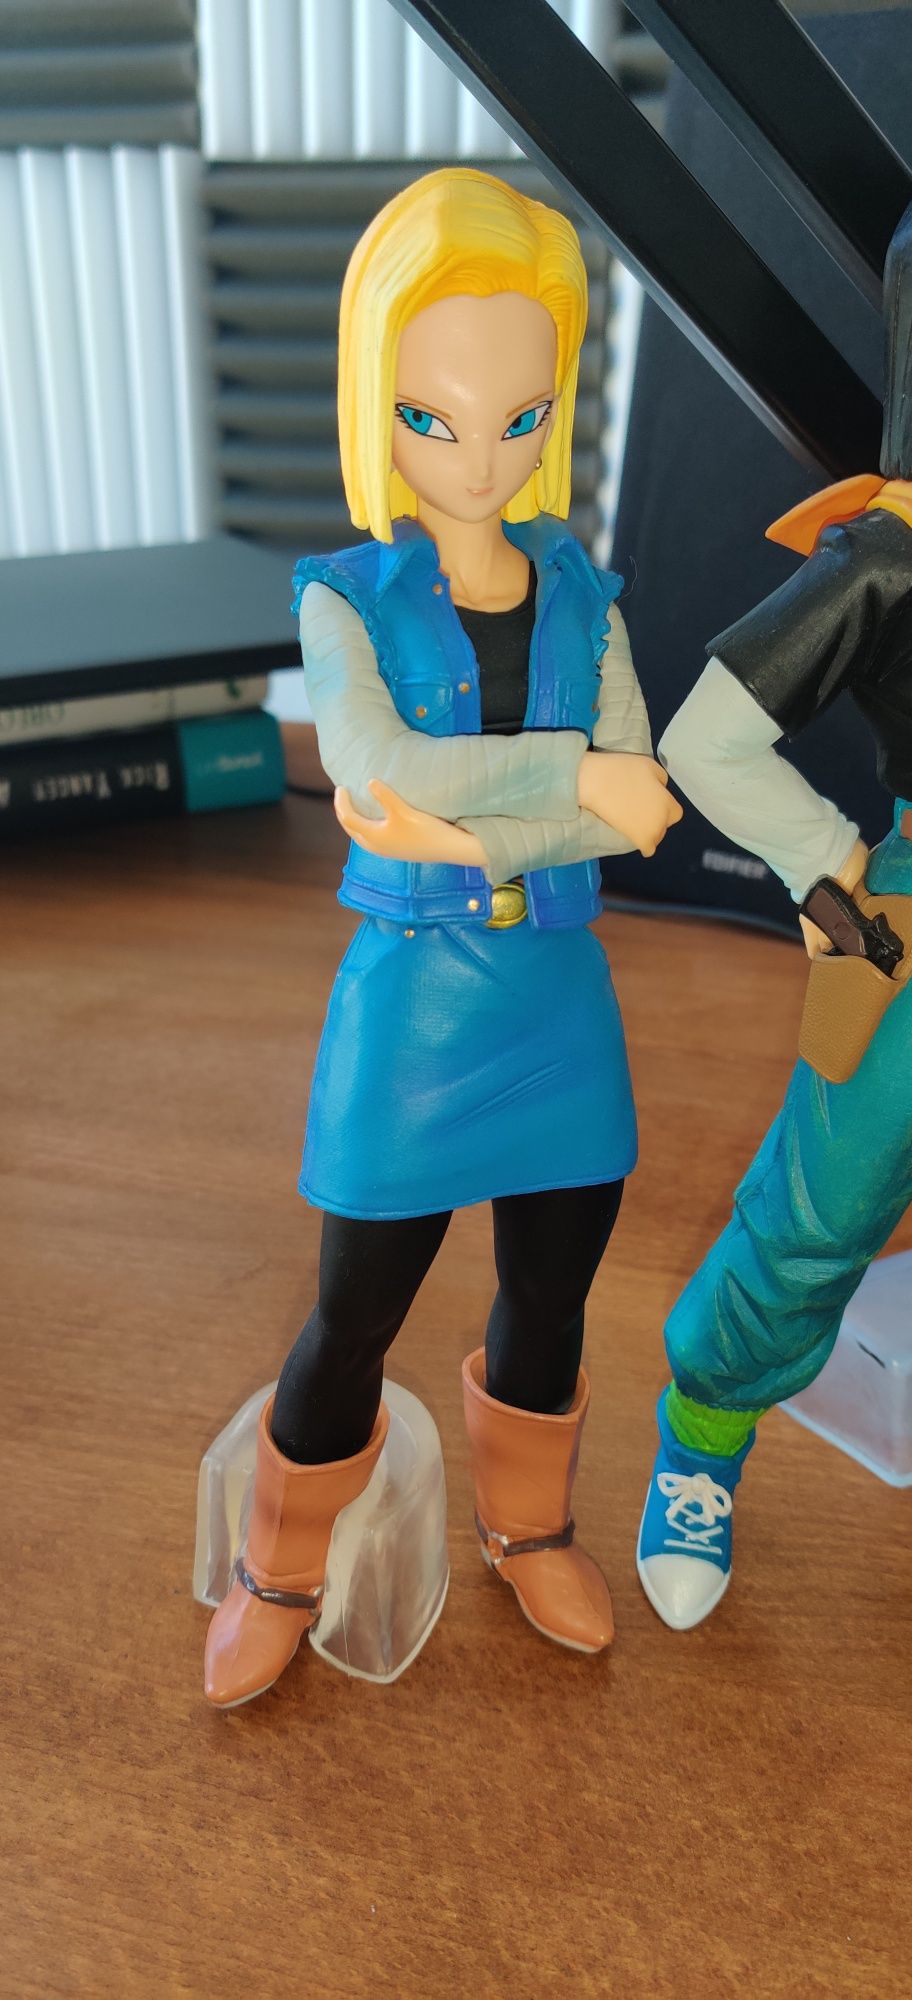 Dragon Ball Z - Android 18 si 17 -  24 cm